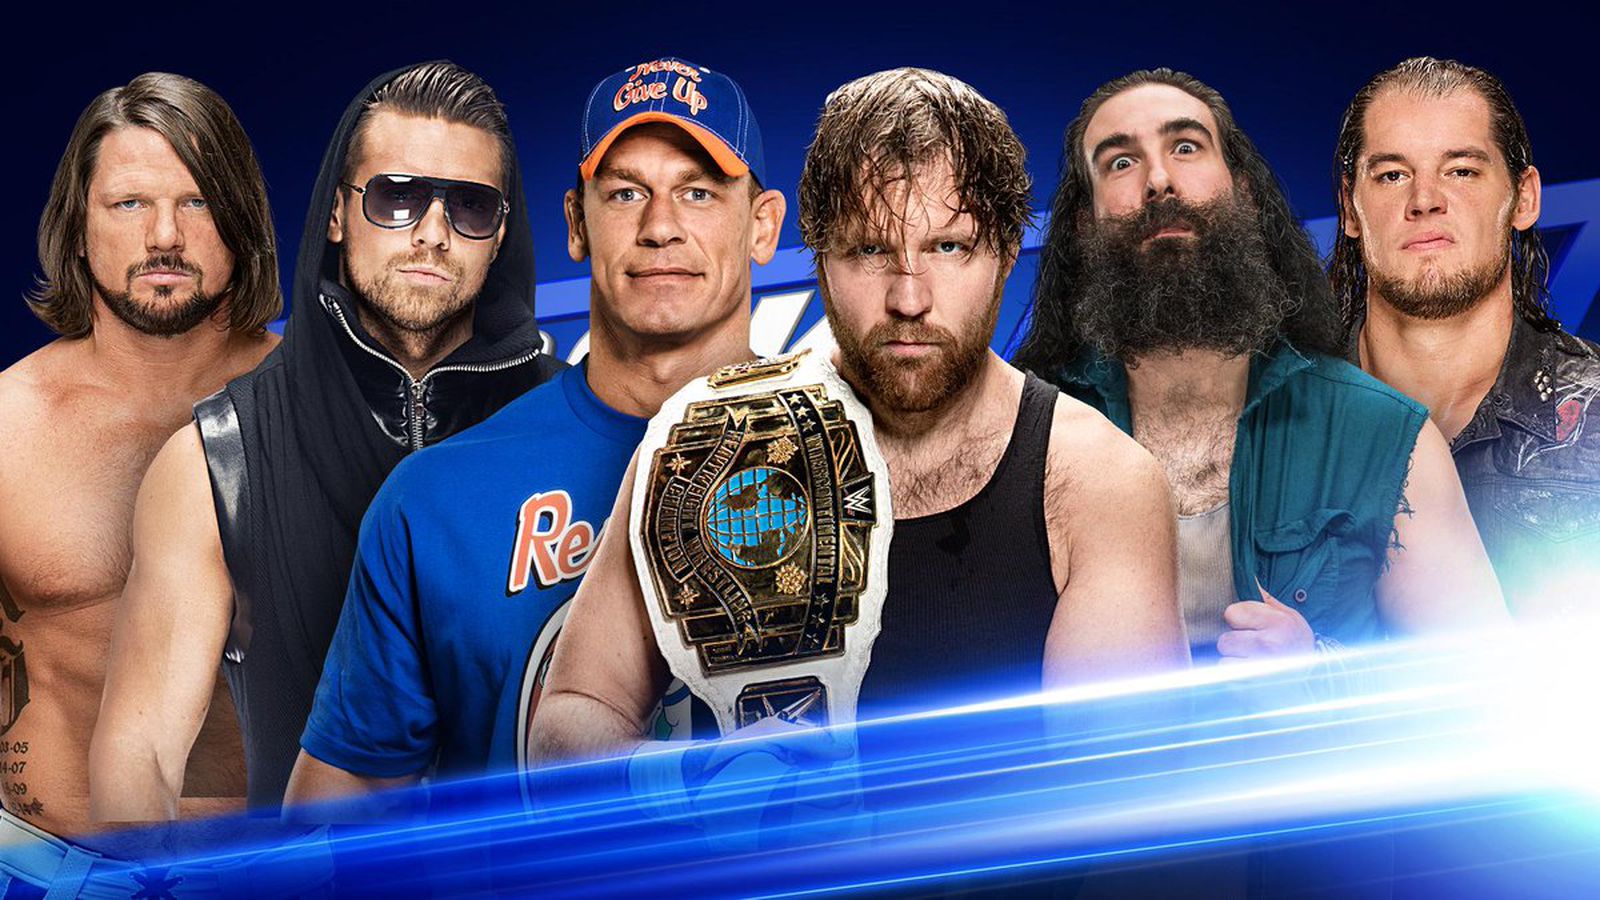 Here are the 10 wrestlers in the battle royal on SmackDown.